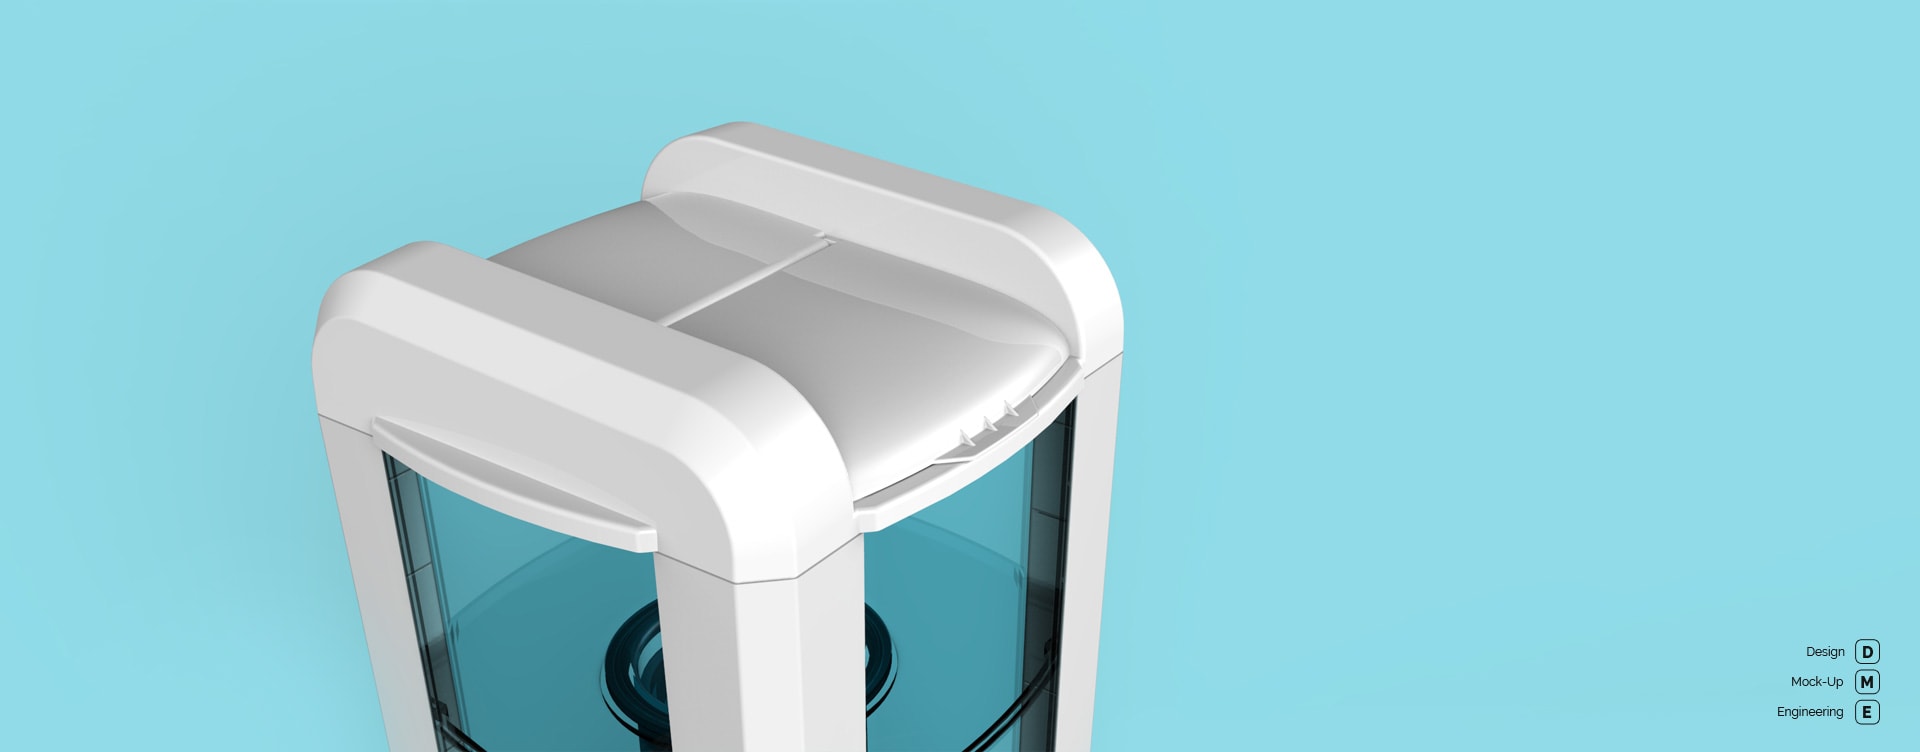 Bluebird gravity water purifier design by story design to clean polluted water and give fresh water for drinking